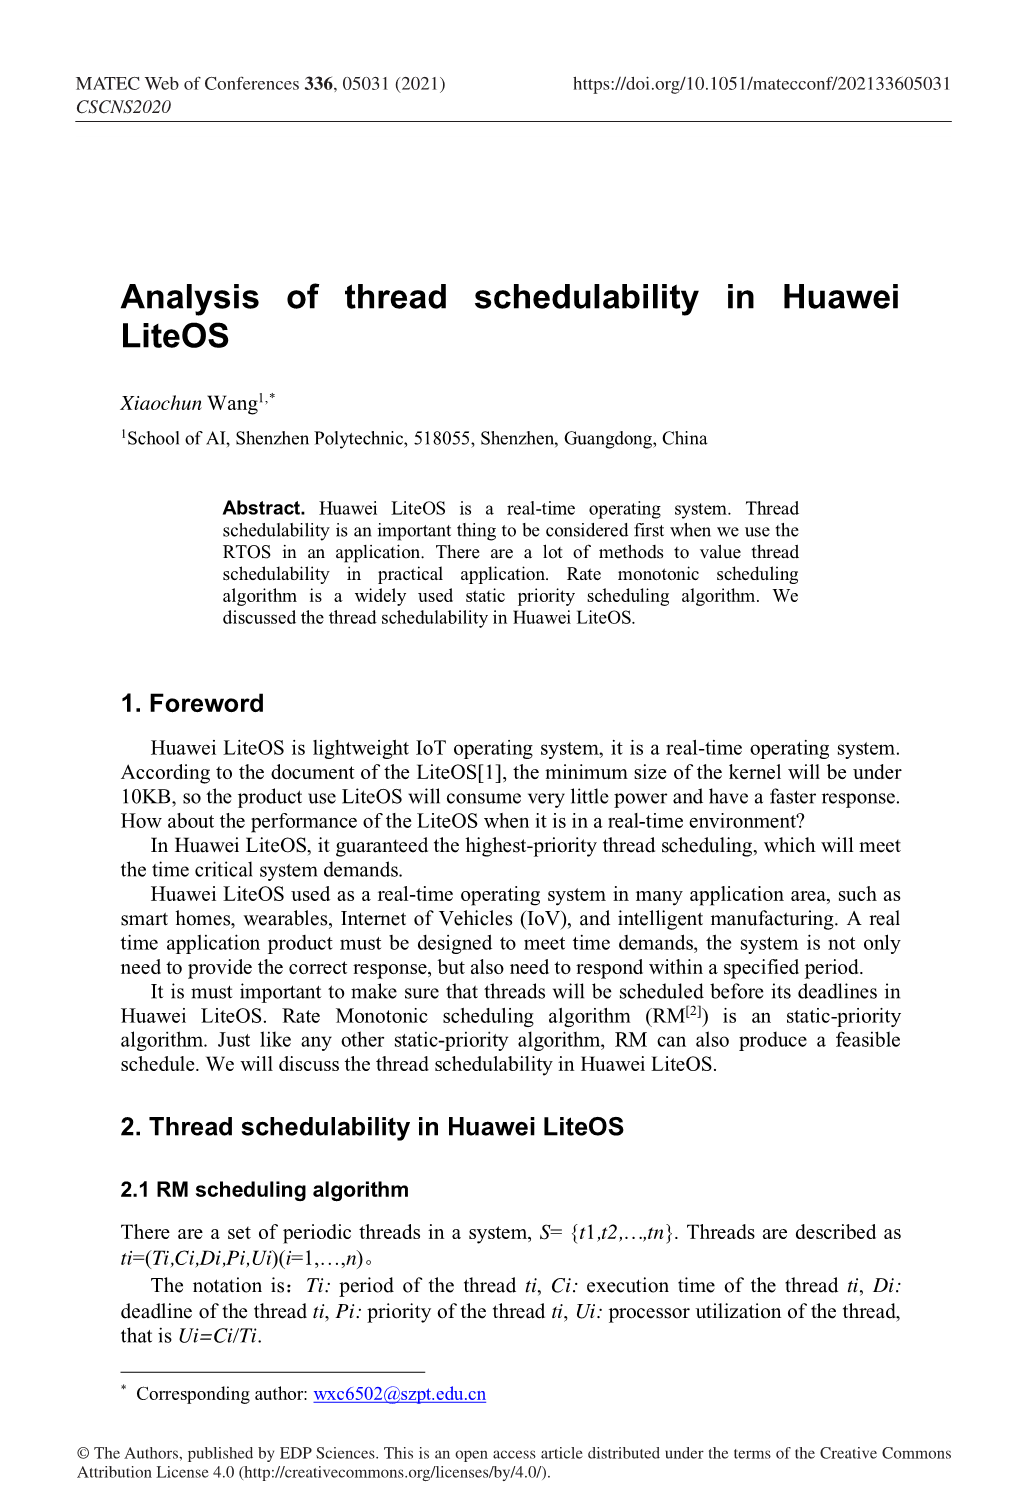 Analysis of Thread Schedulability in Huawei Liteos